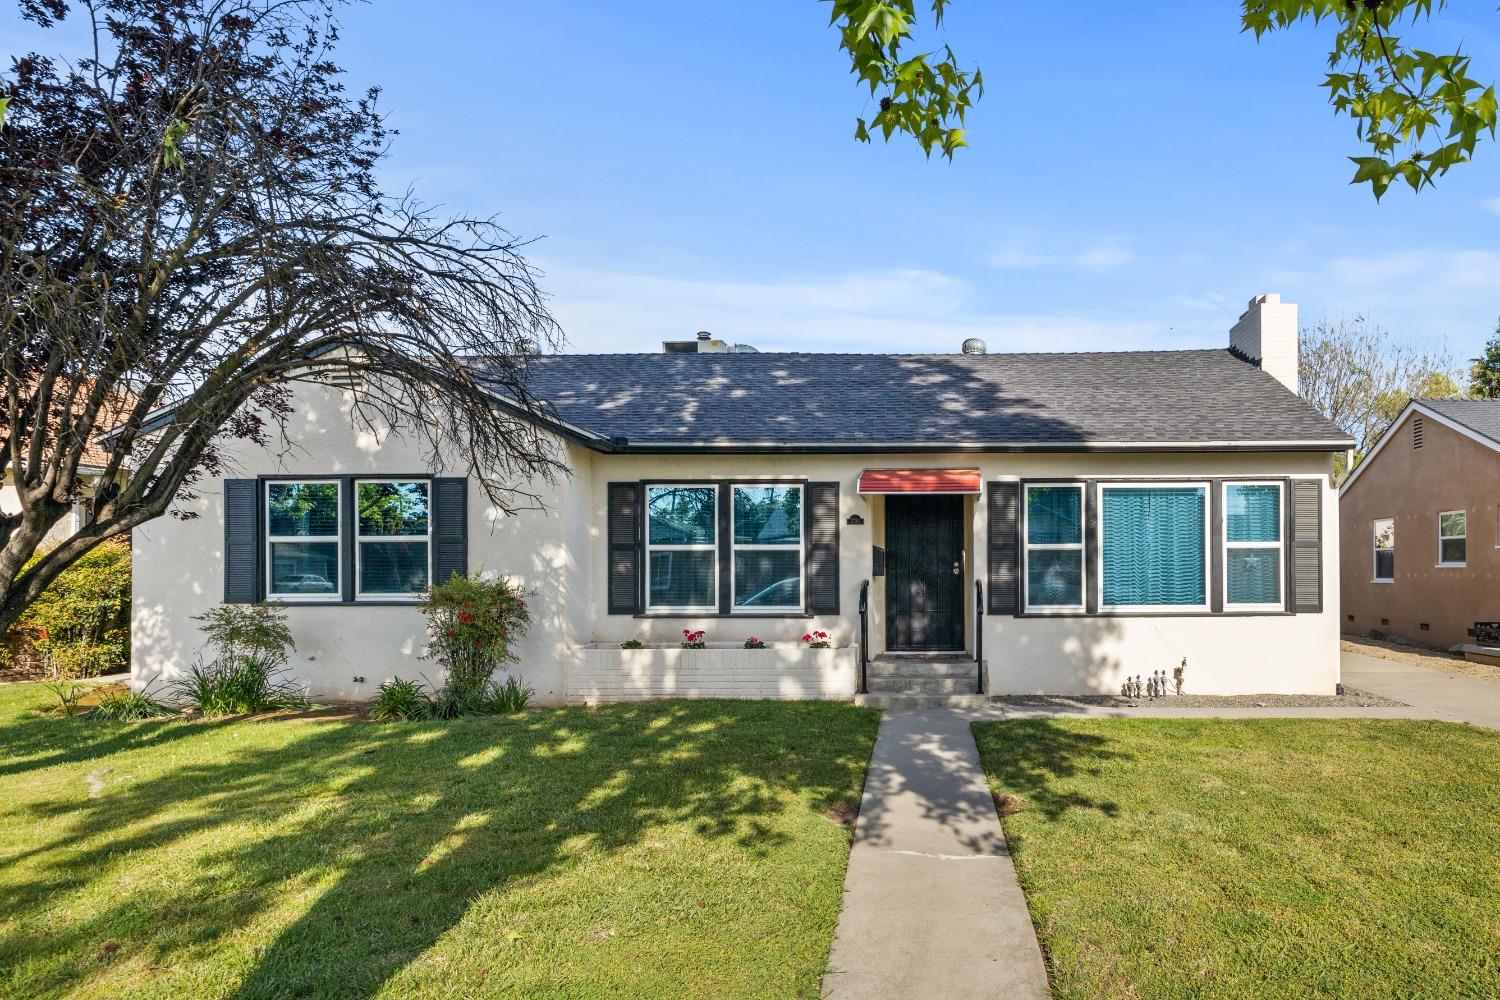 Photo of 2734 N Vagedes Ave in Fresno, CA